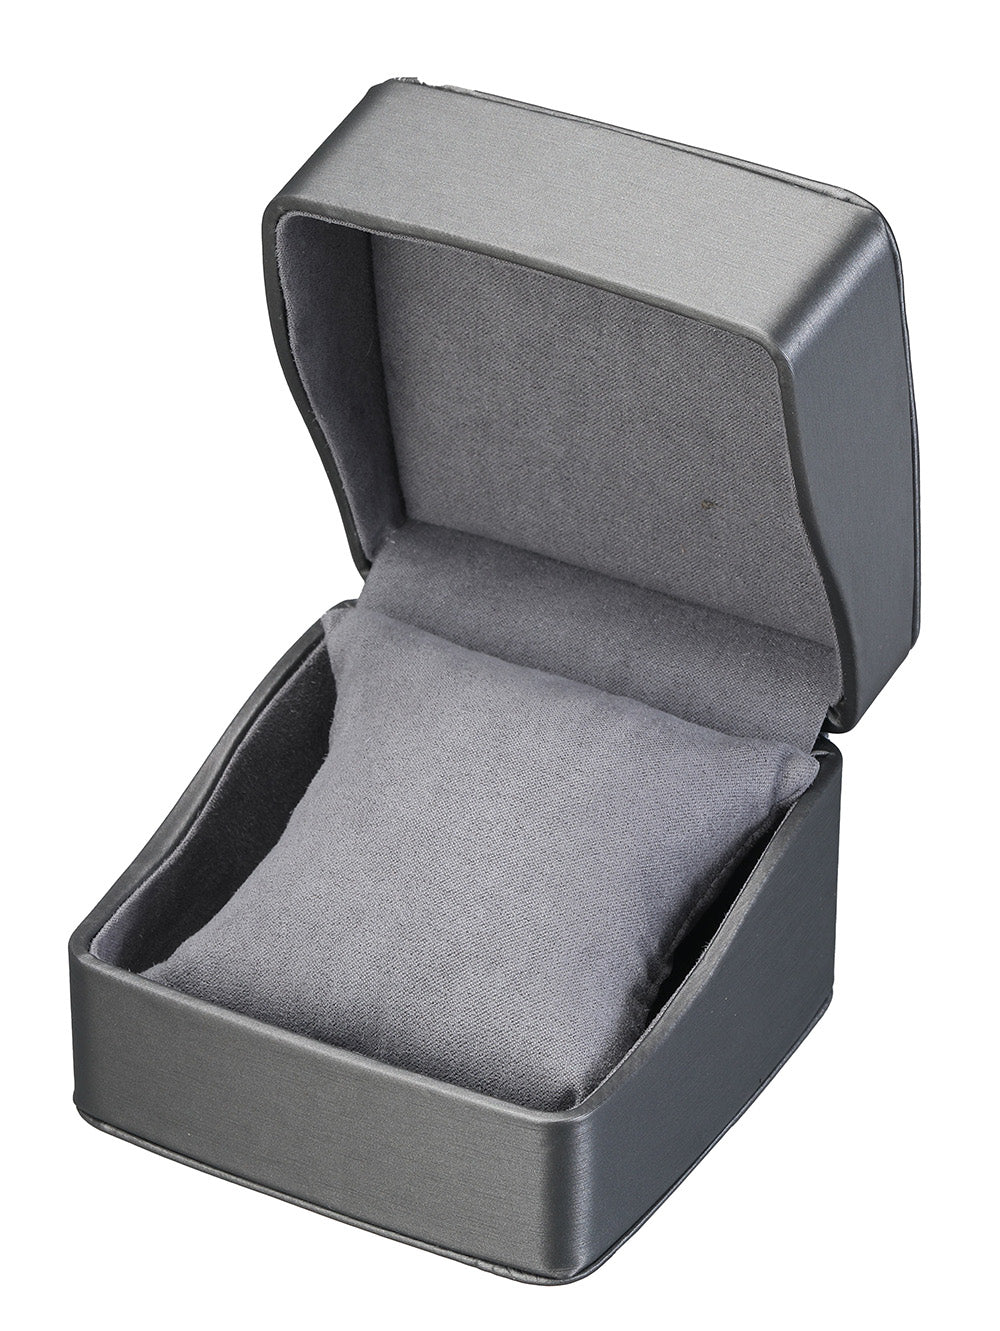 "Dusk" Pillow Box in Brushed Grey Leatherette and Grey Microsuede